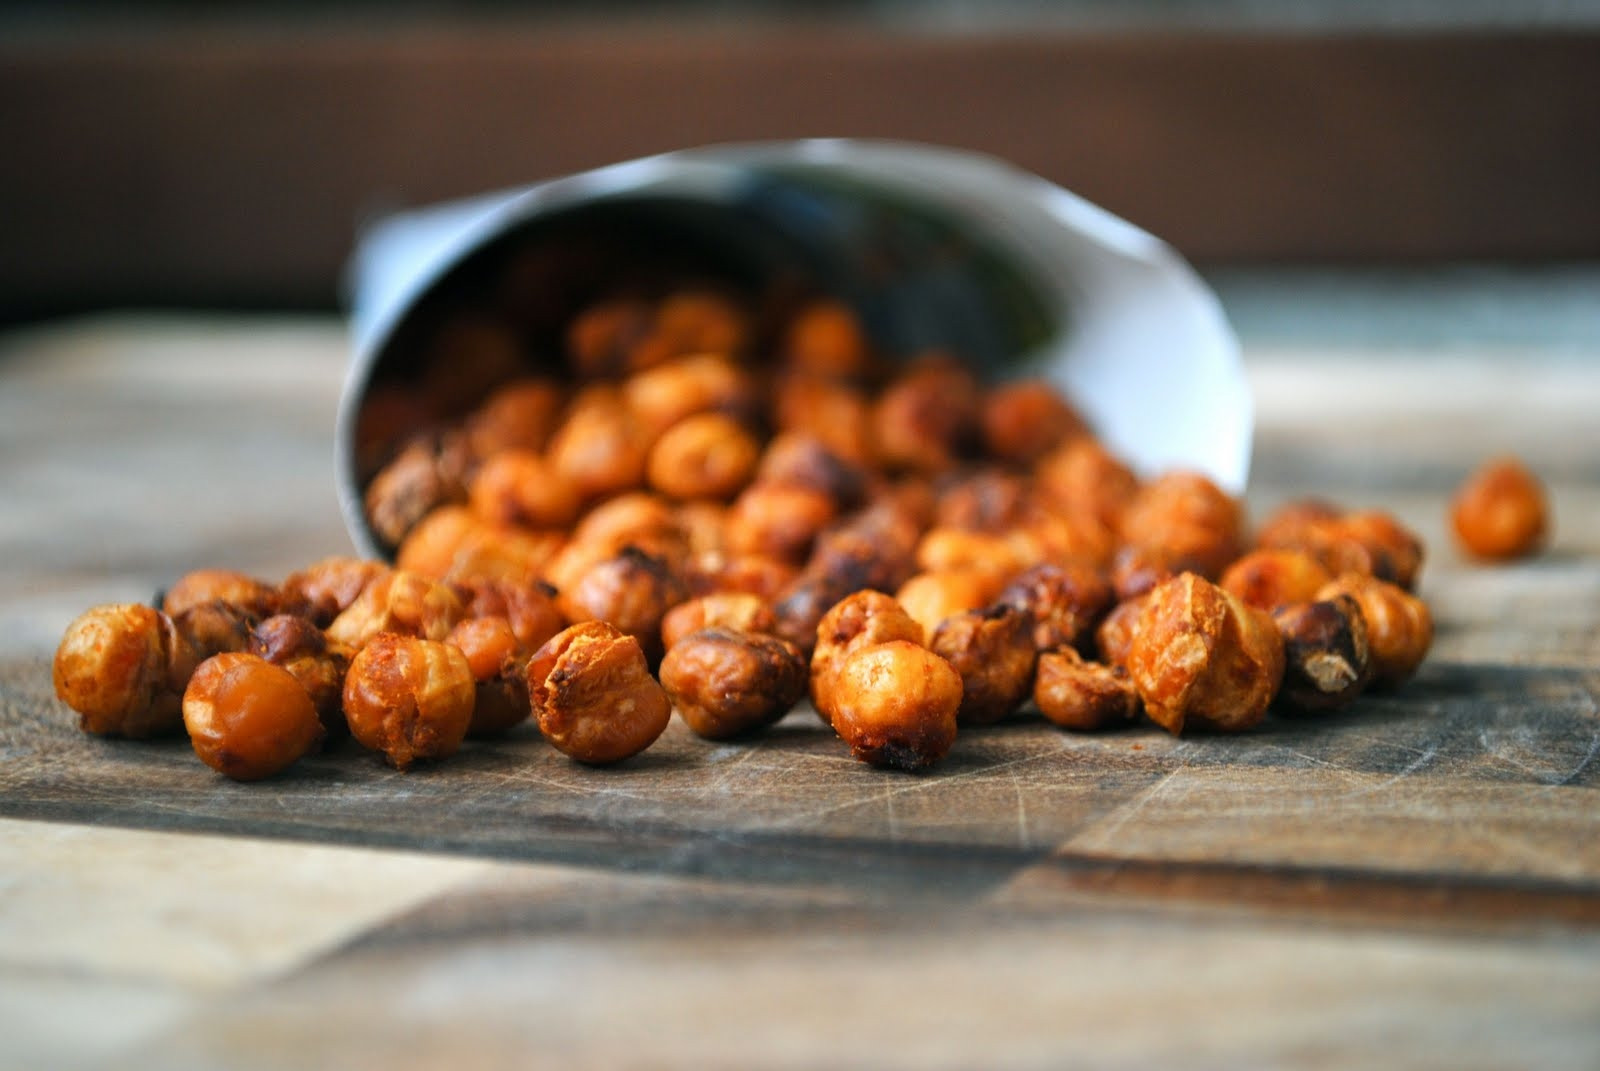 Baked Chickpea Recipes
 Baked Spiced Chickpeas – Secret Recipe Club